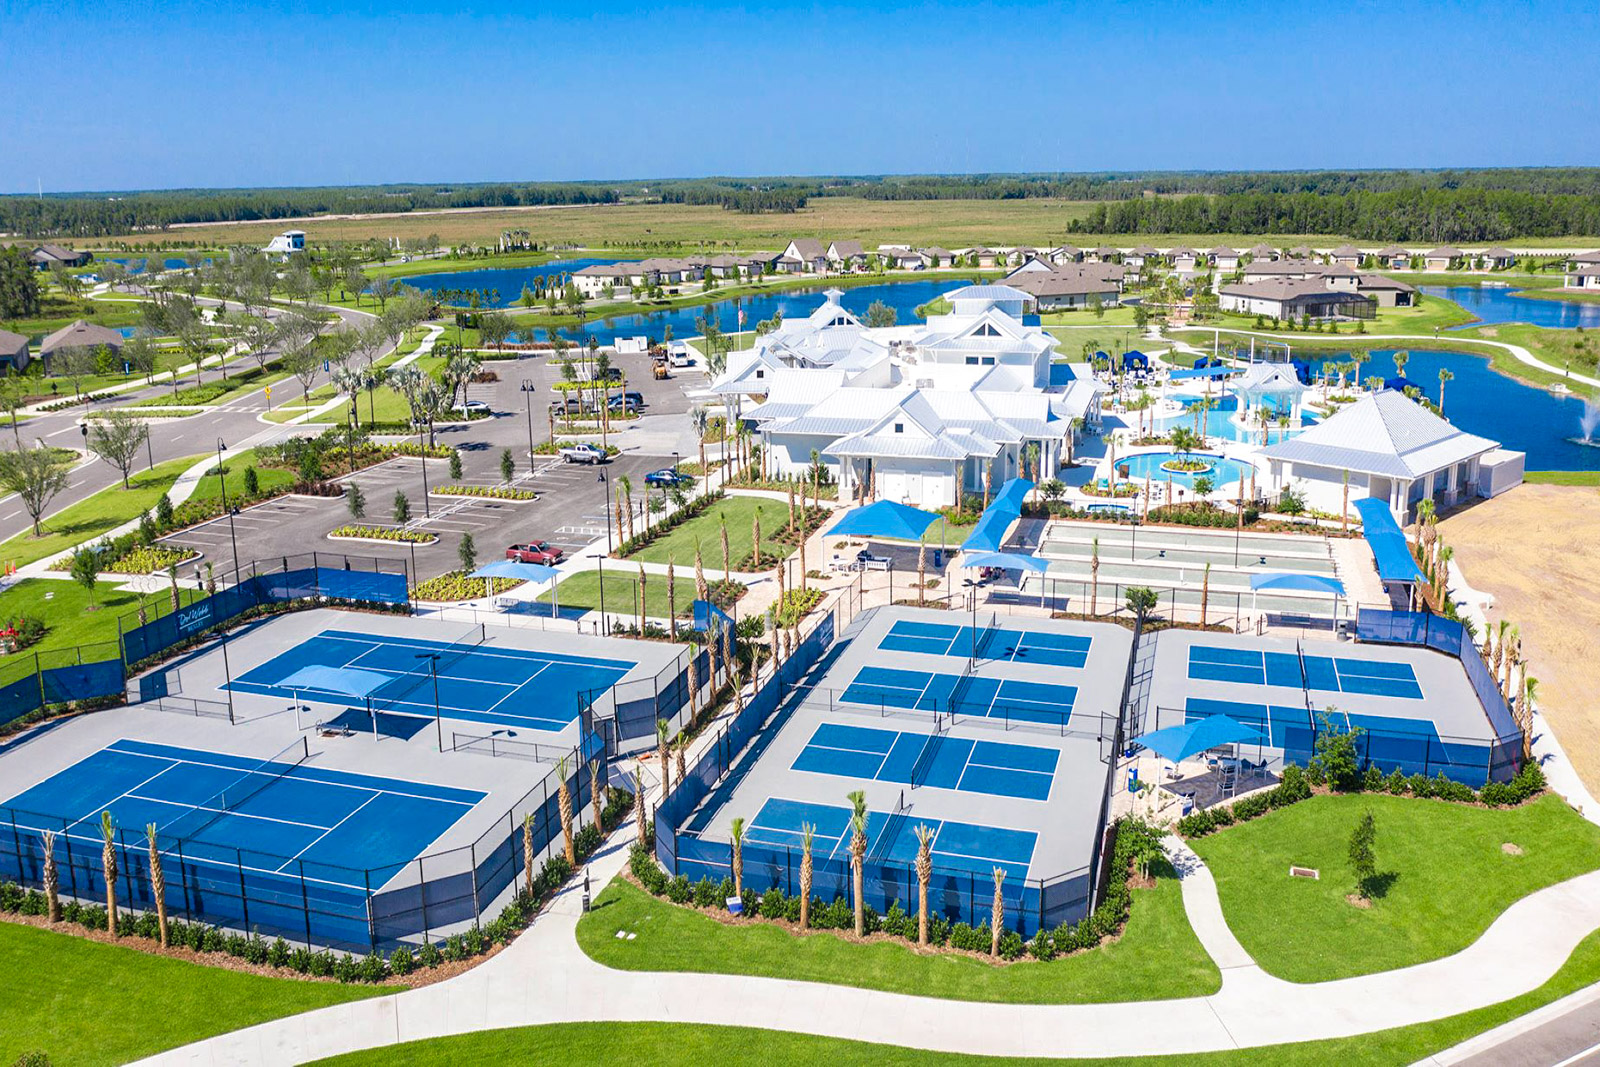 Aerial view of the outdoor amenities at Del Webb Bexley in Land O'Lakes, Florida